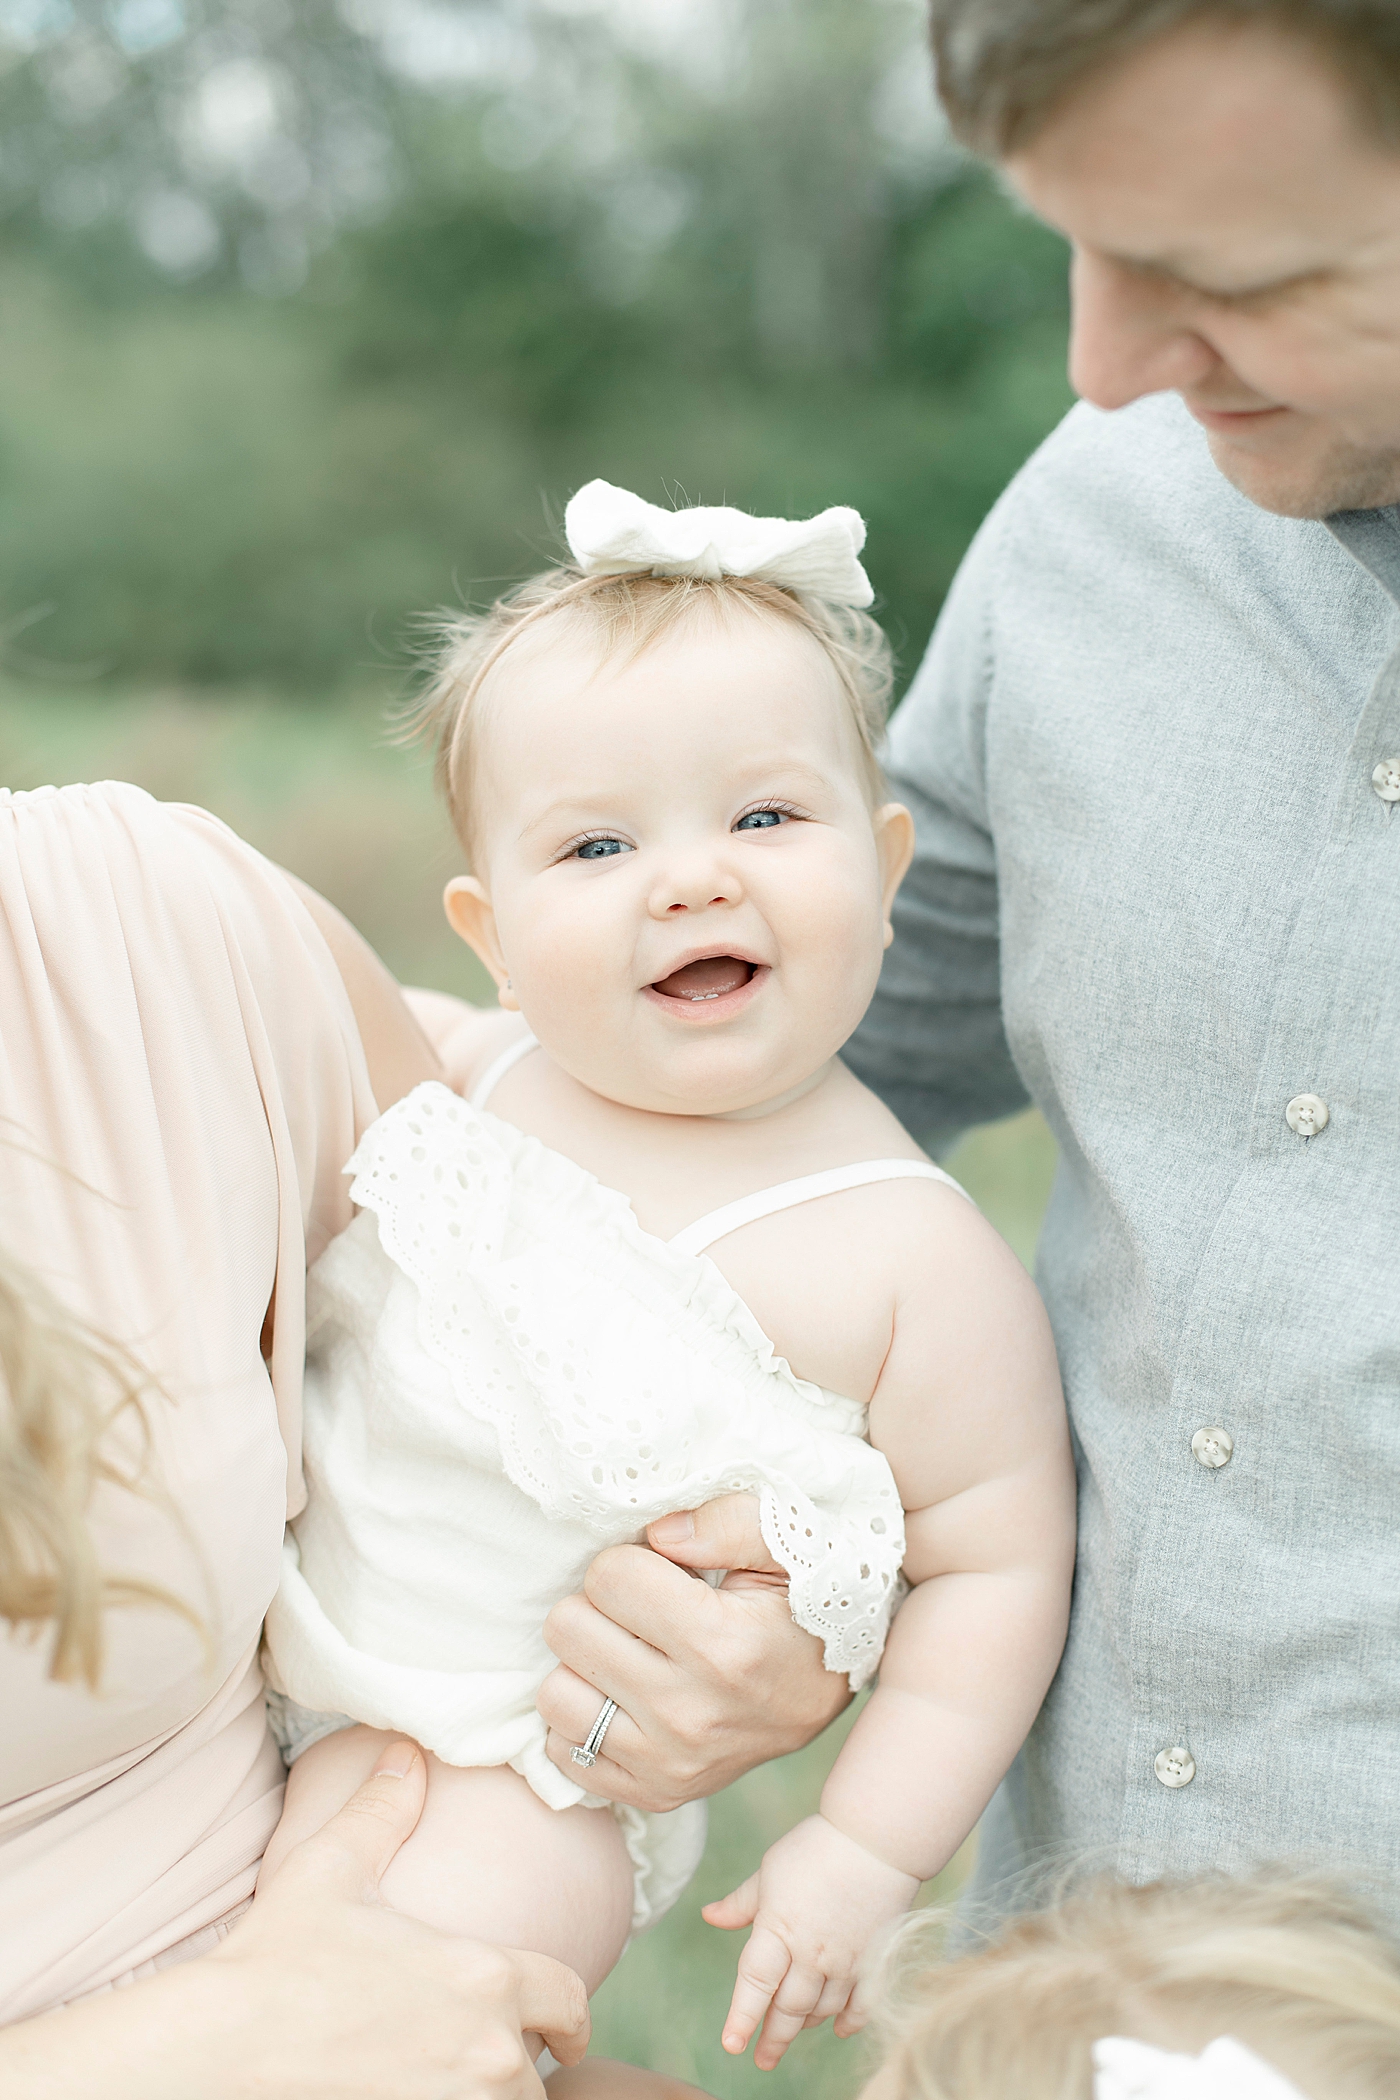 Baby girl smiling with parents | Photo by Little Sunshine Photography 